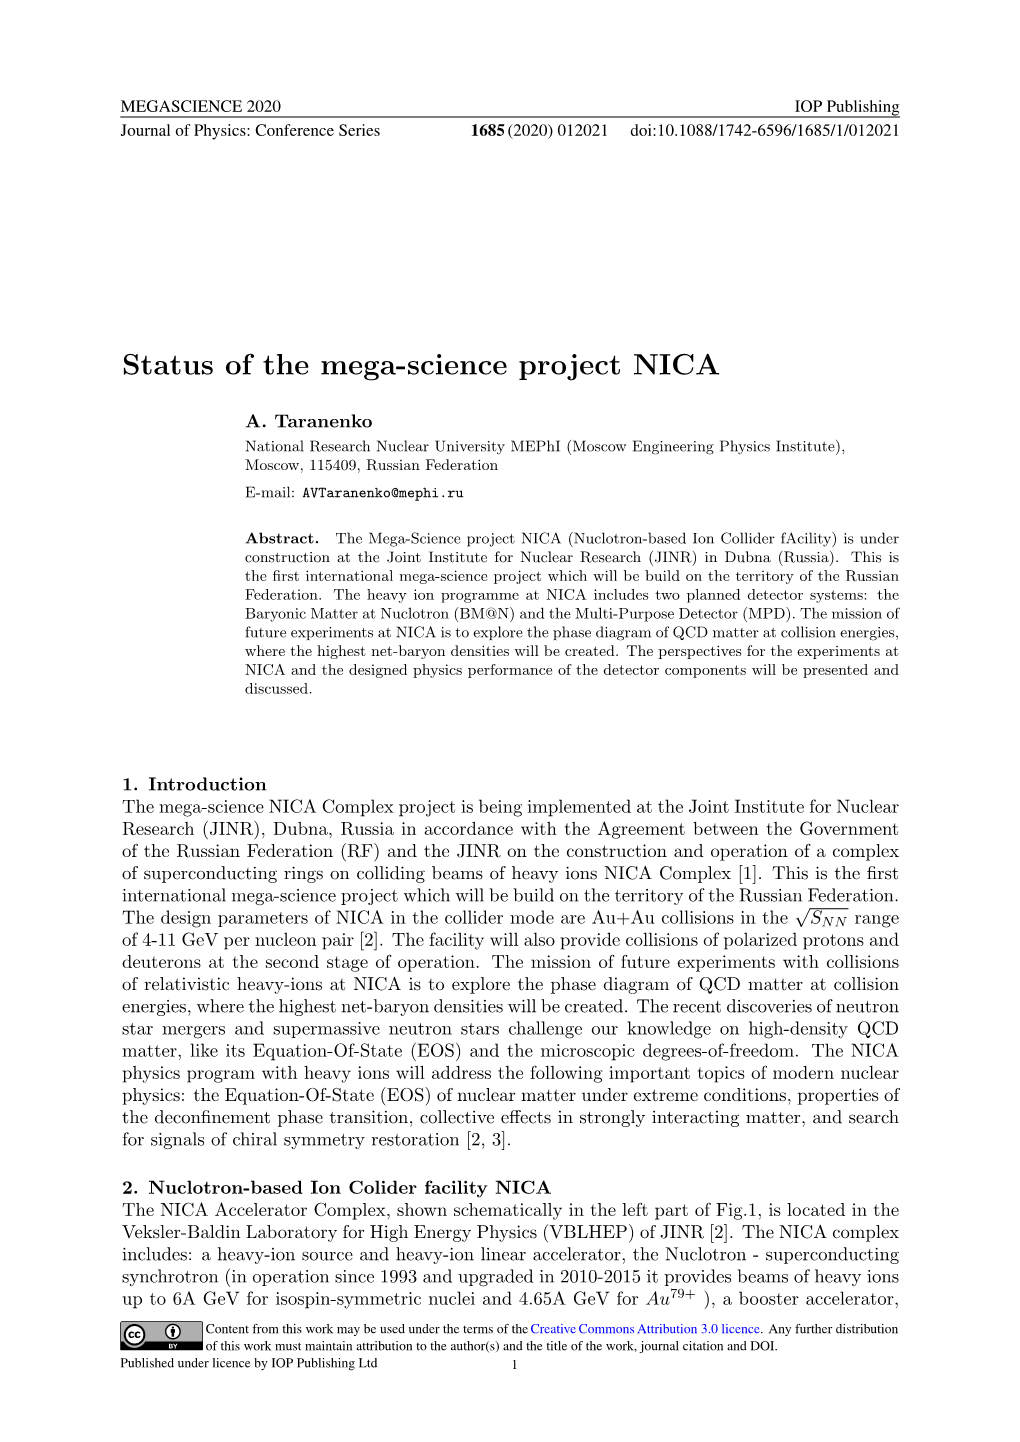 Status of the Mega-Science Project NICA